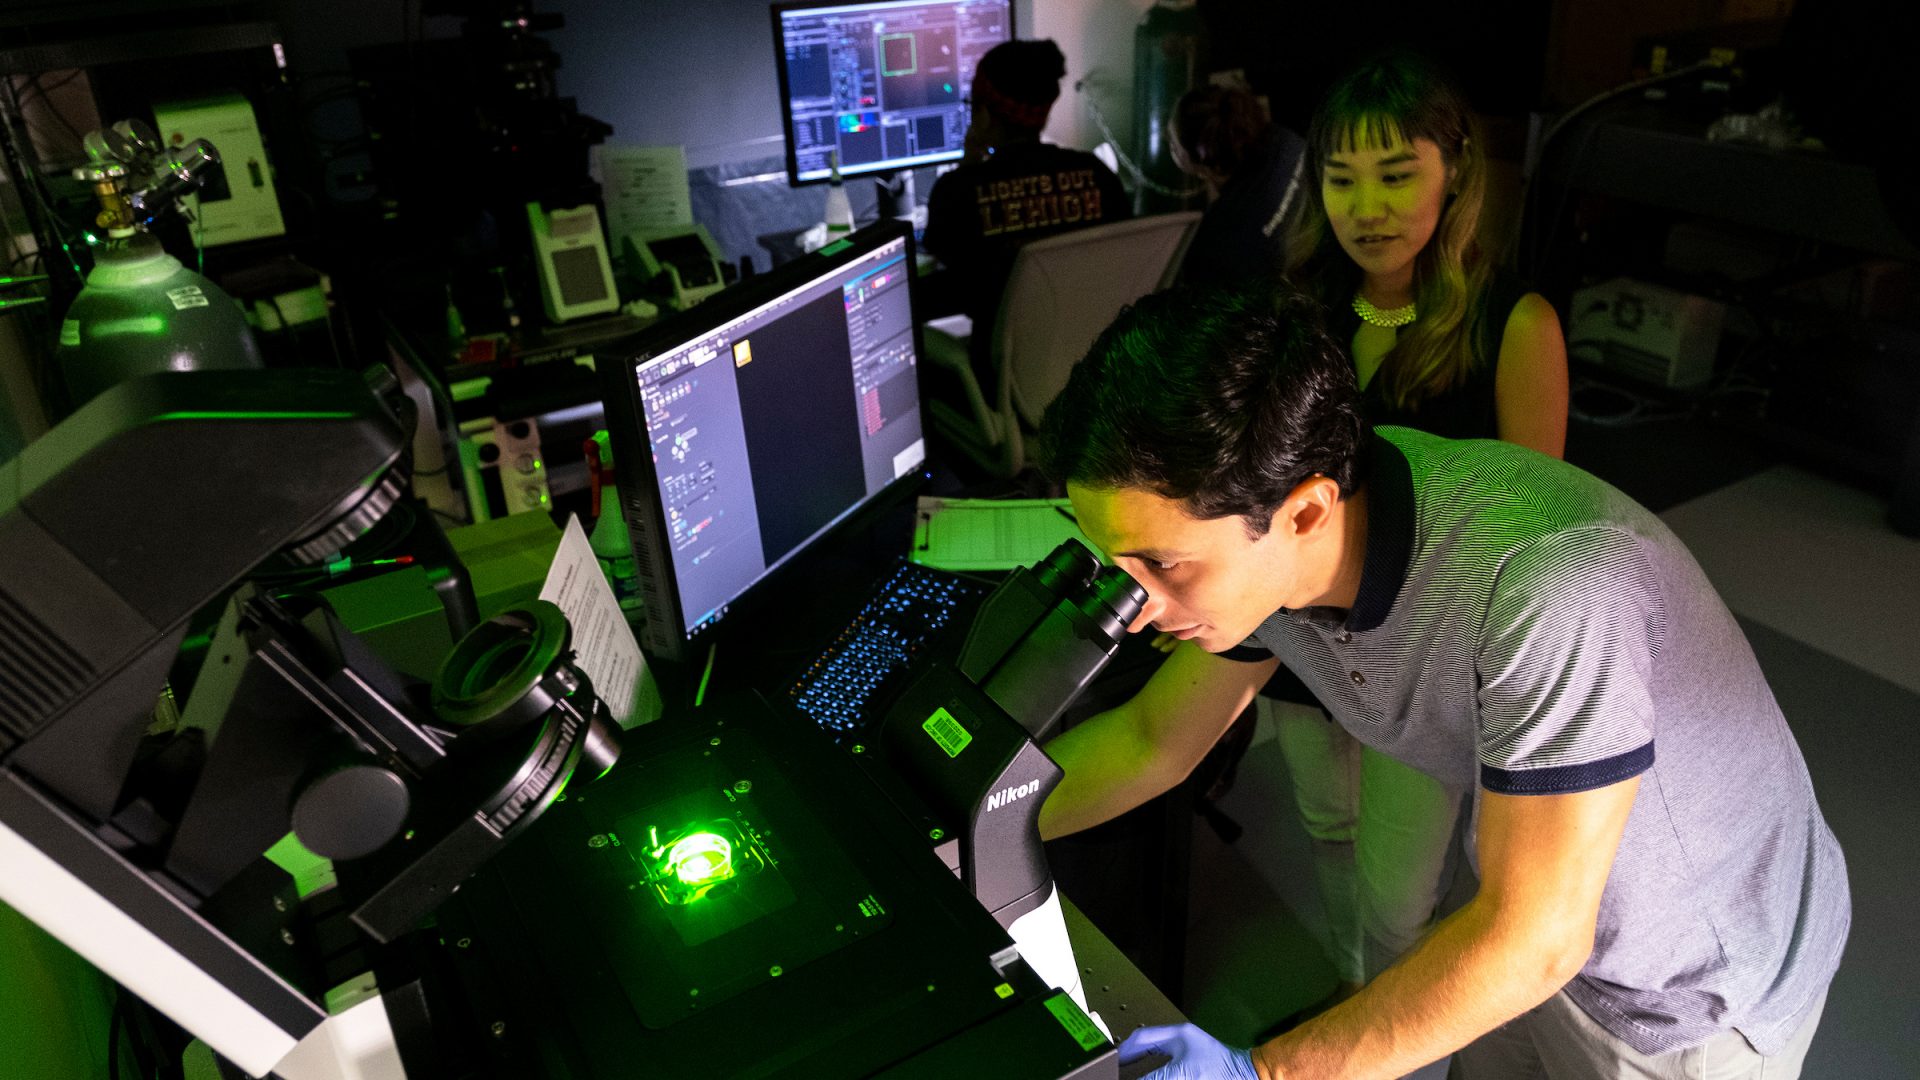 Researchers look through microscopes at a large computer setup.